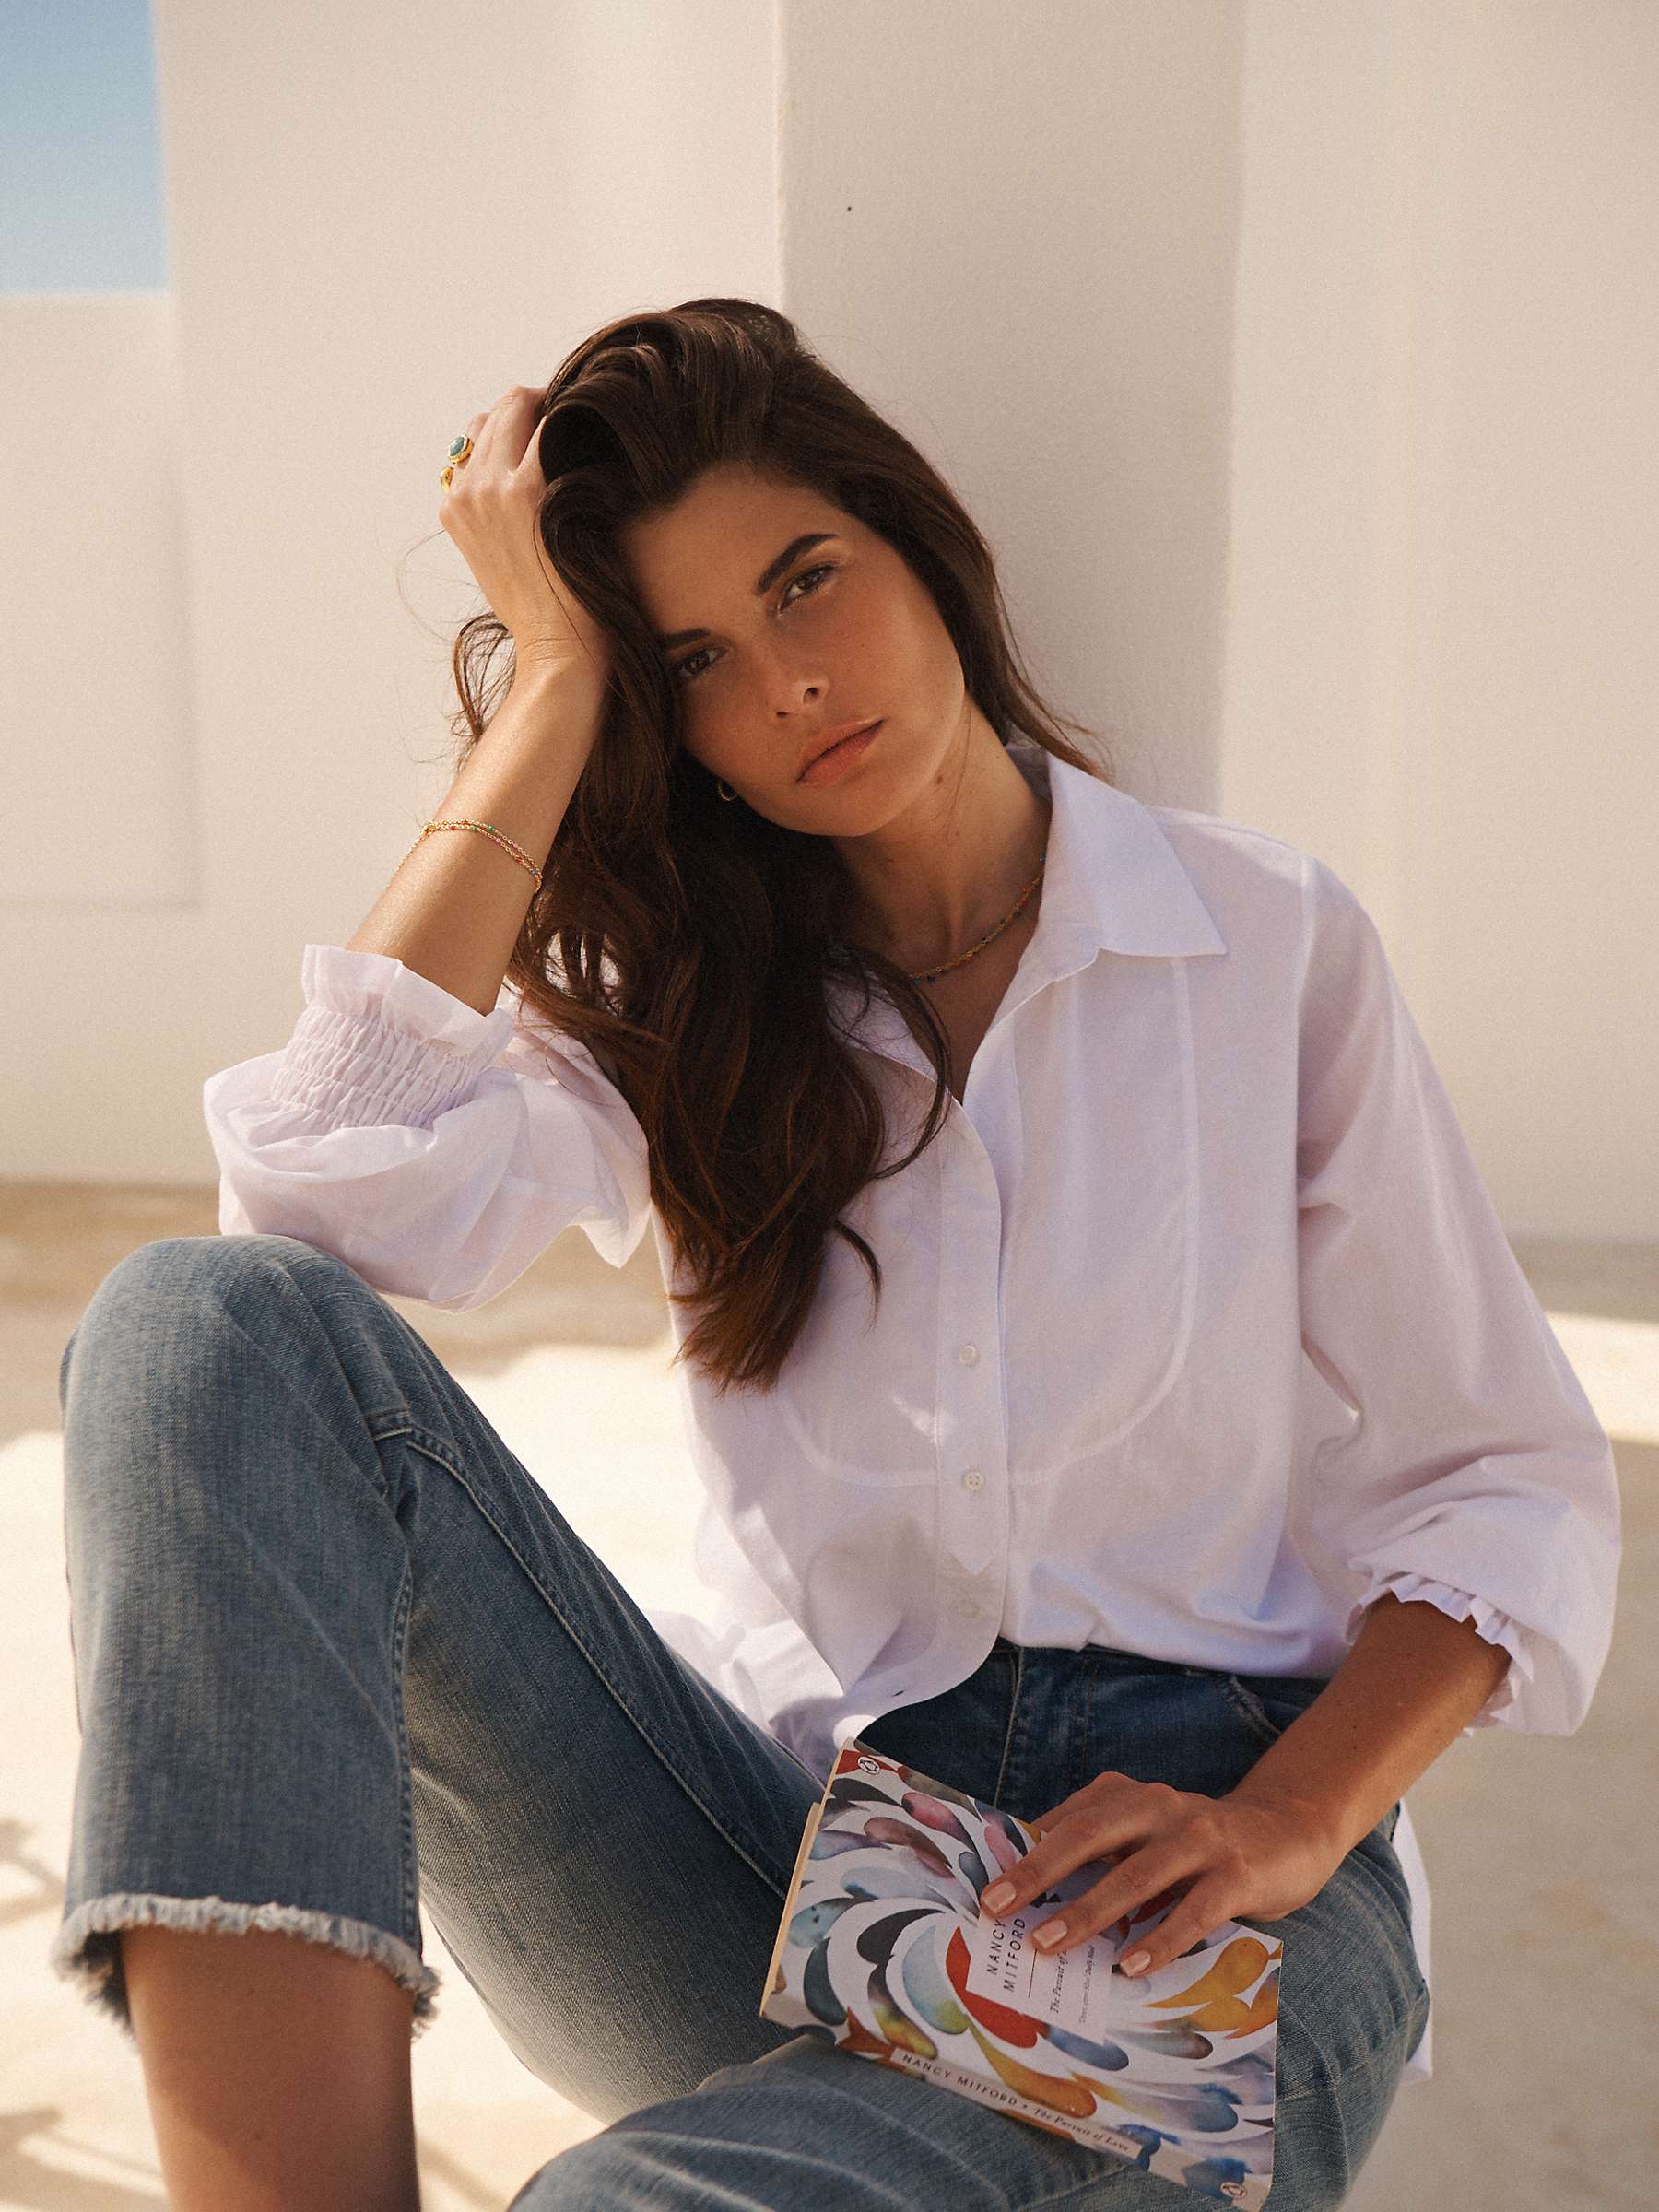 Buy NRBY Anya Cotton Shirt, White Online at johnlewis.com